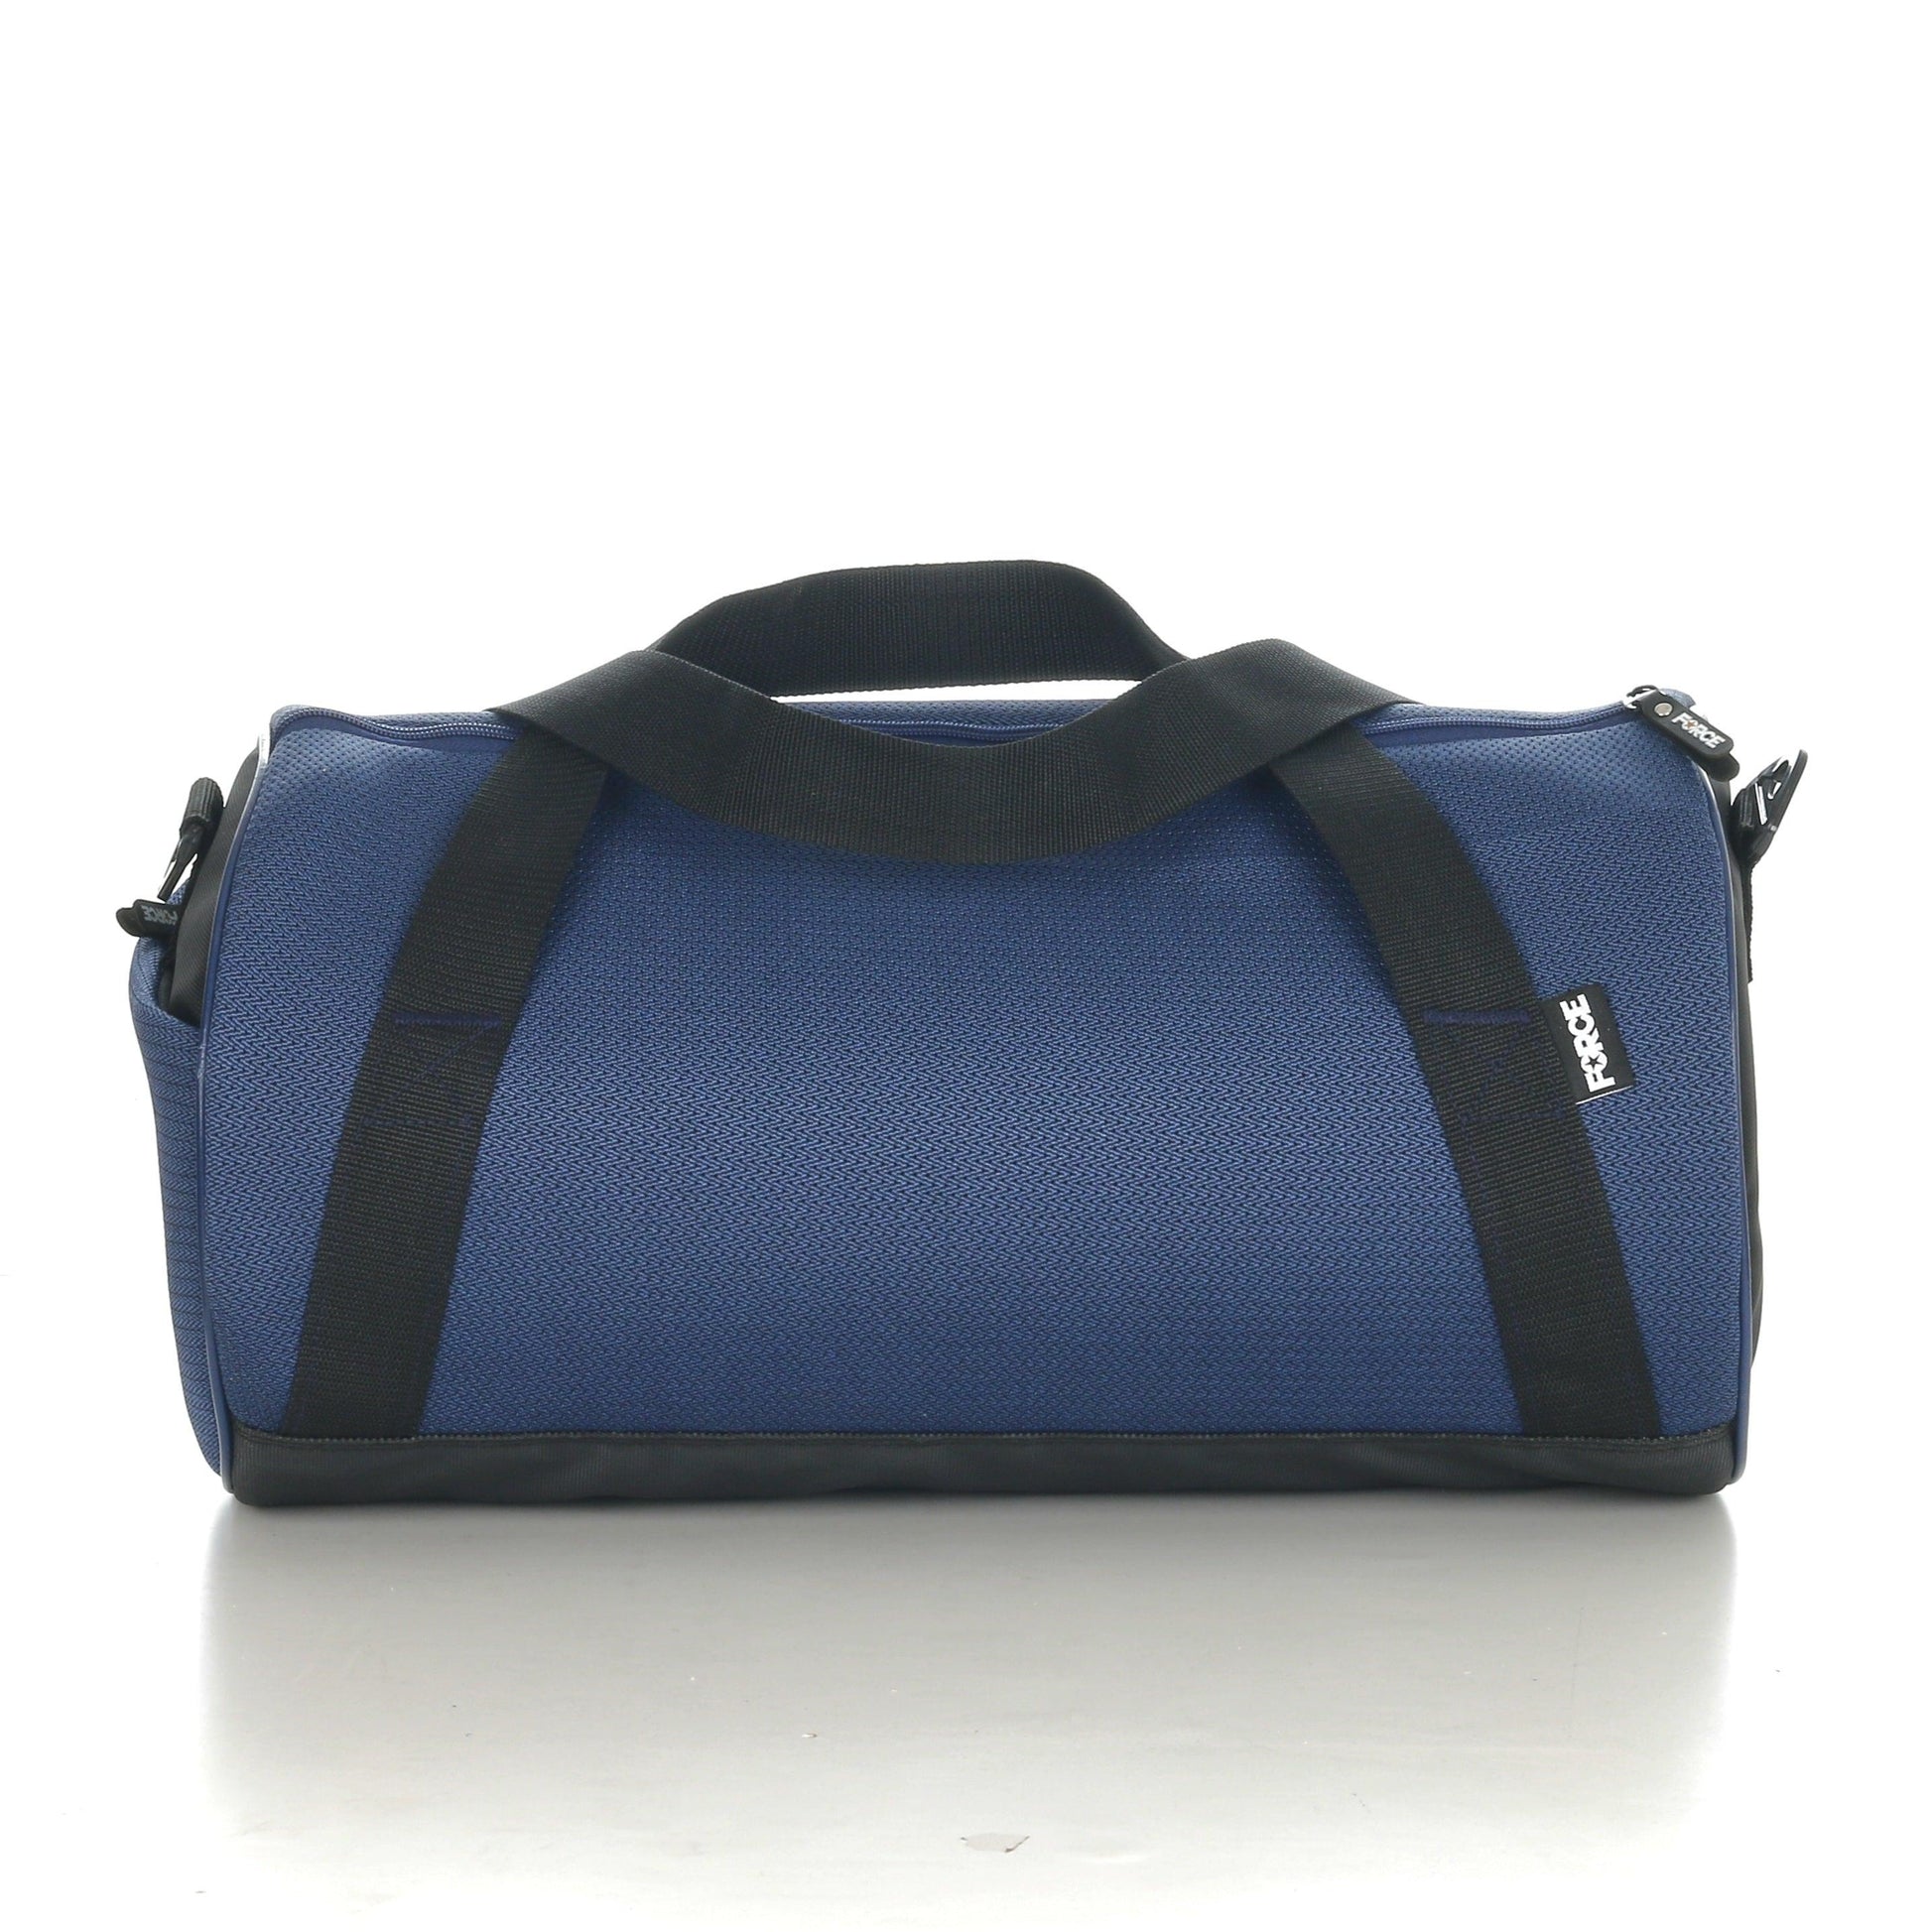 FORCE Sports Bag Mesh - NAVY - GM-111 - FORCE STORES